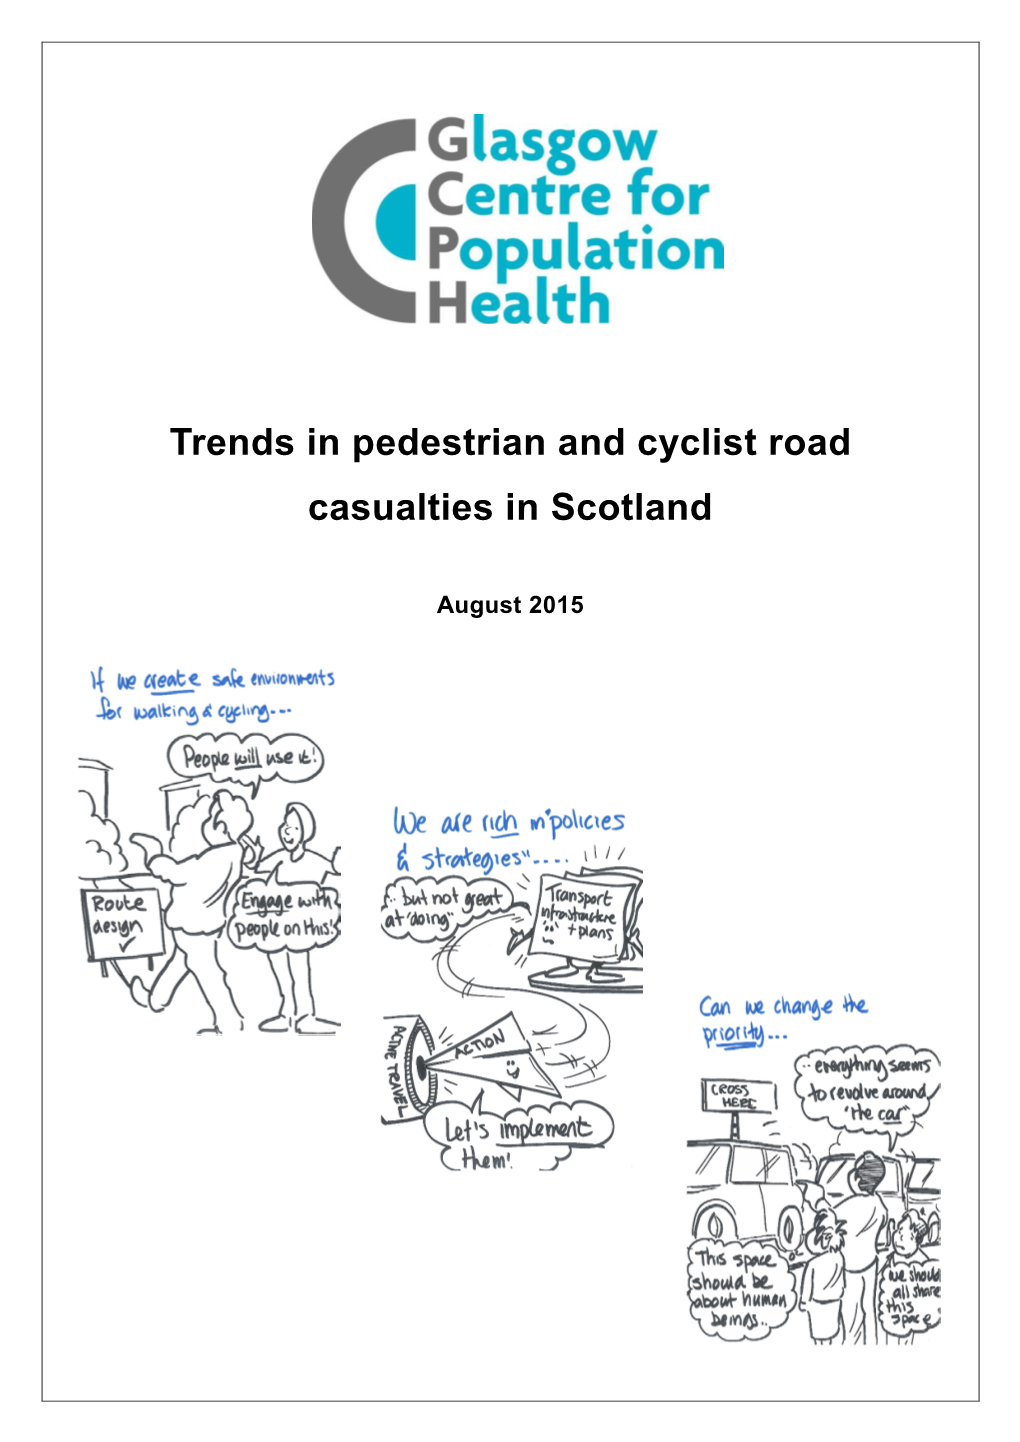 Trends in Pedestrian and Cyclist Road Casualties in Scotland